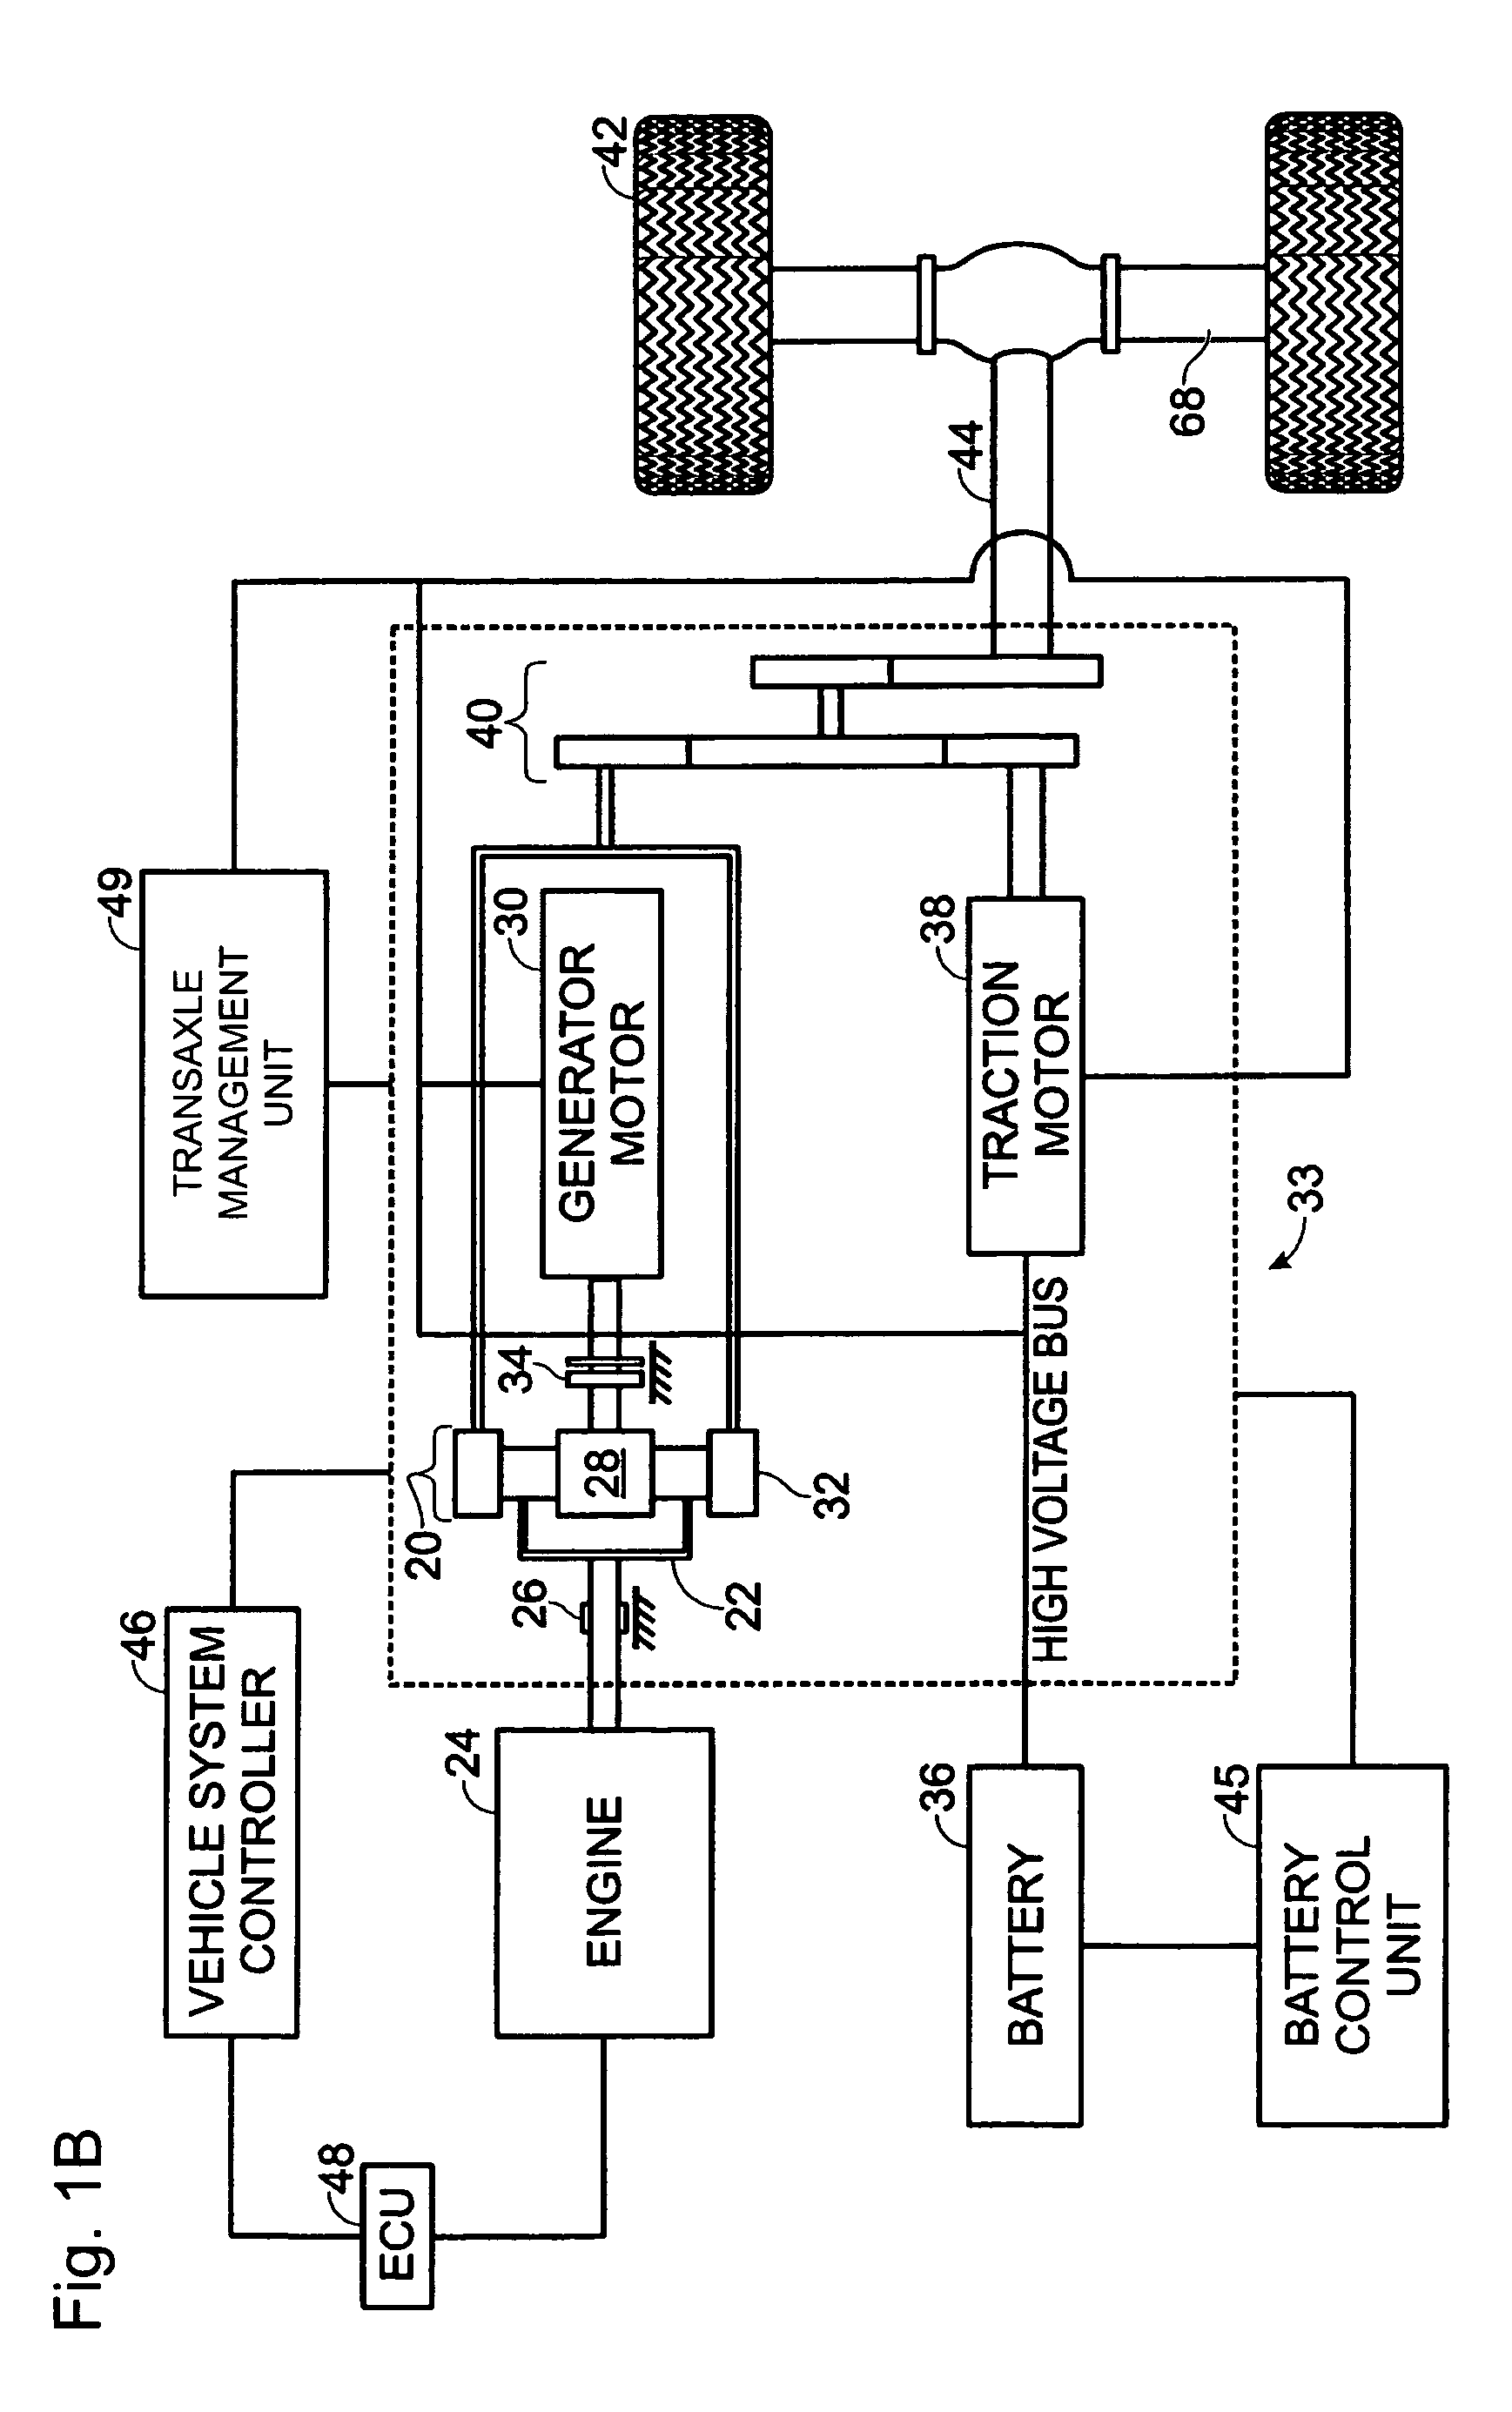 System and method for operation of an engine having multiple combustion modes and cylinder deactivation